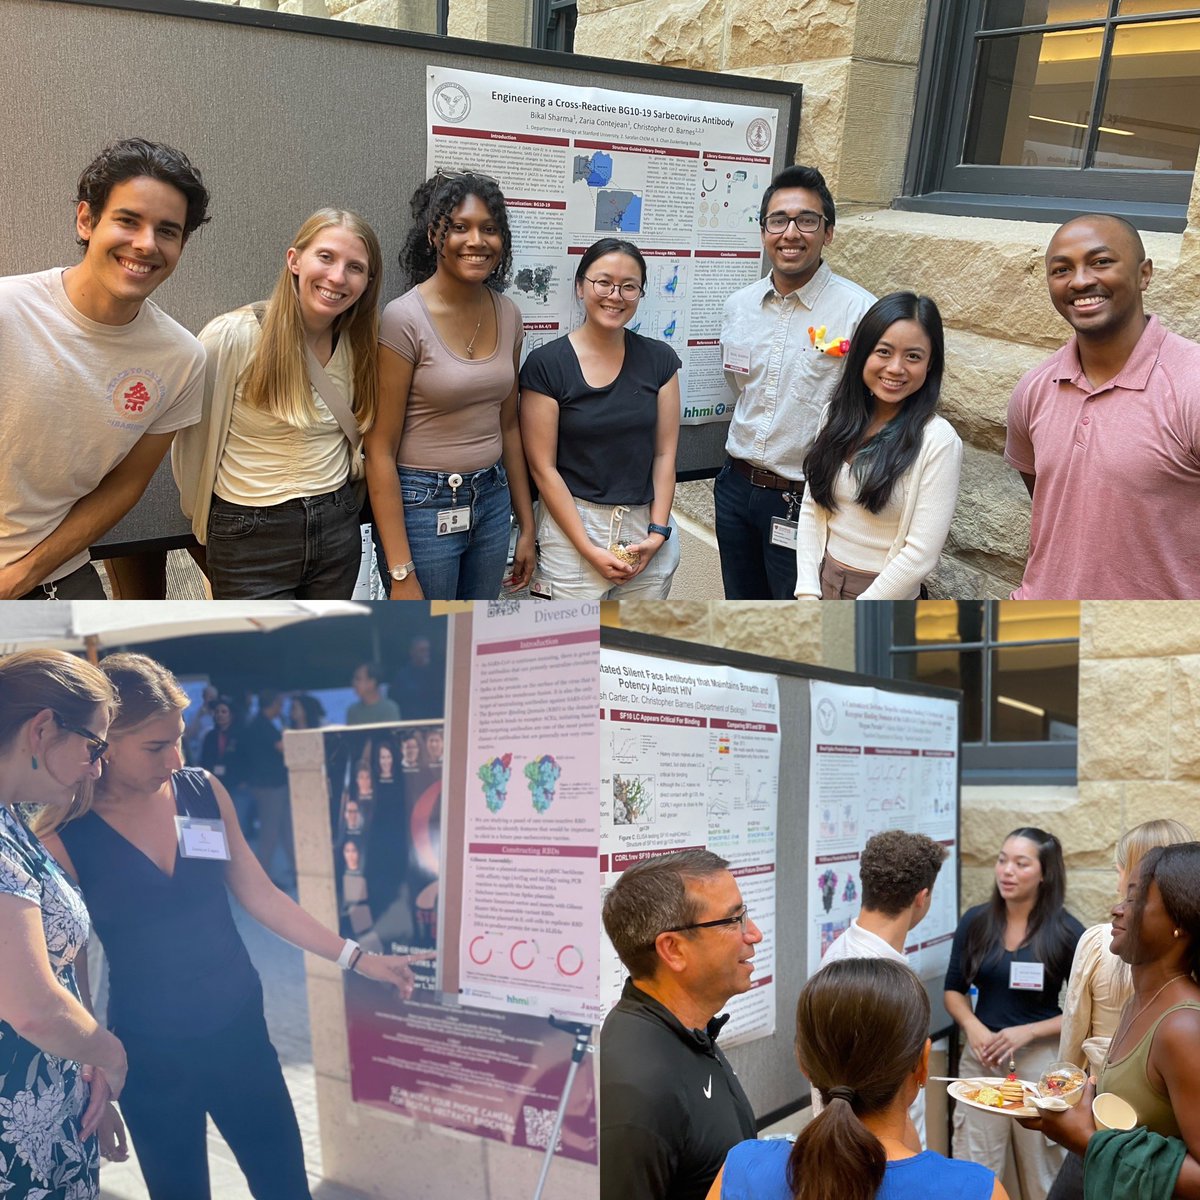 What a fantastic summer it’s been in the Barnes Lab! We had the privilege of host 4 incredibly talented undergrads in our lab, and their enthusiasm, curiosity and hard work was nothing short of inspiring #SummerResearch 😁👏🏾